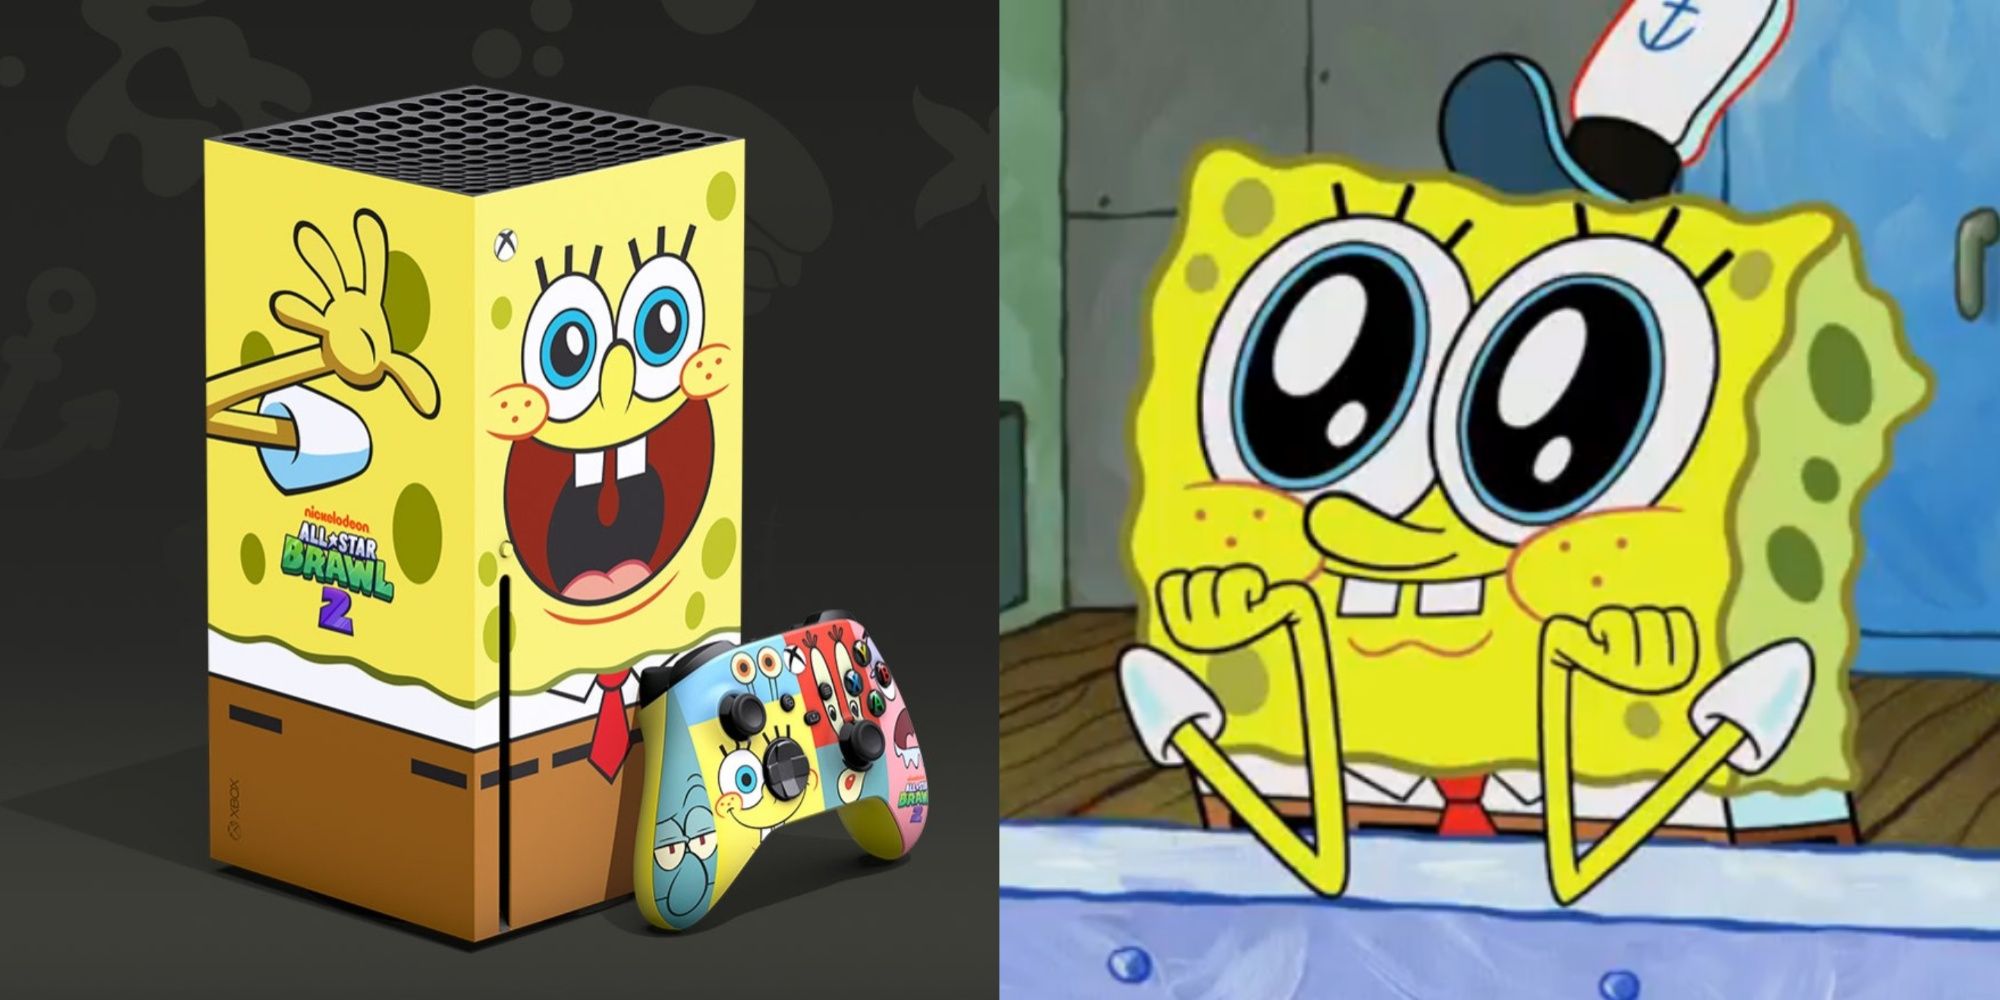 spongebob squarepants series x with matching controller, and spongebob with big eyes